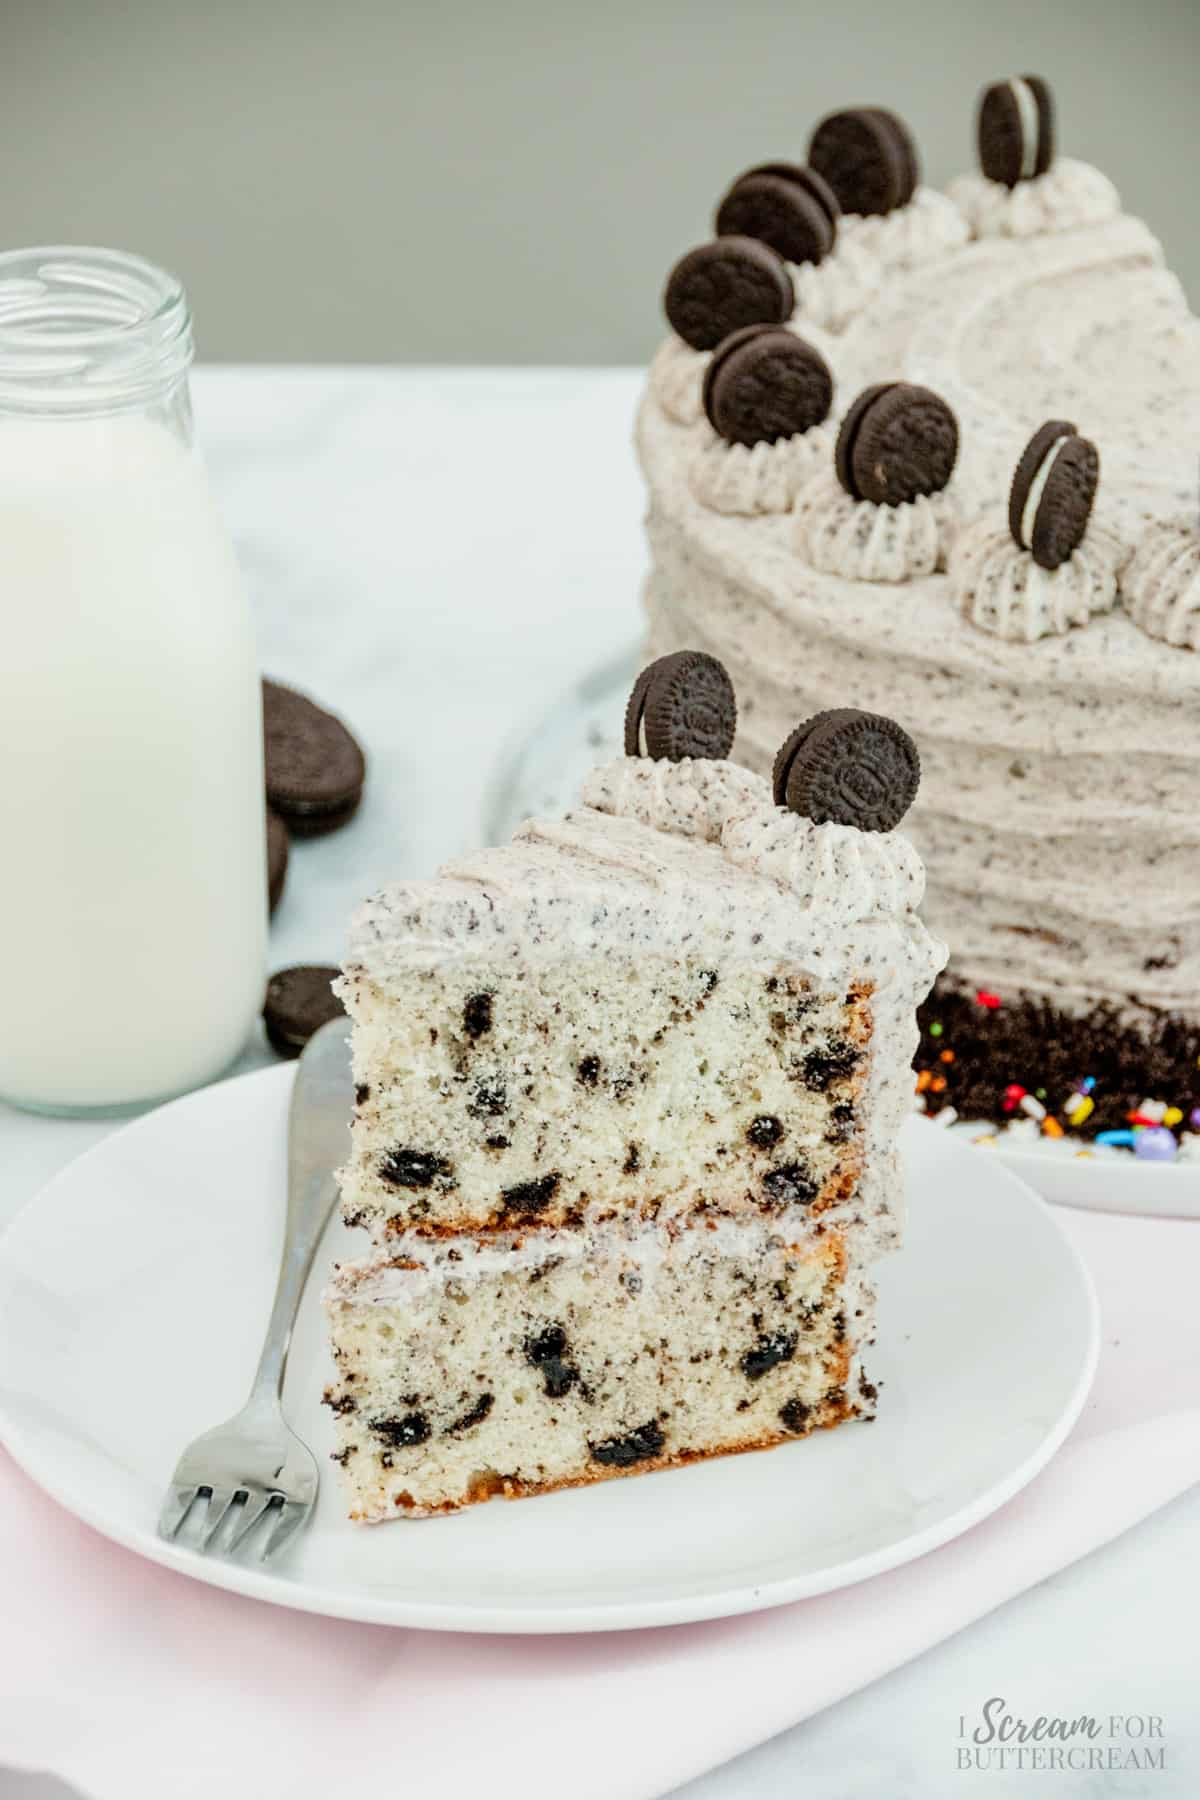 Large slice of layer cake with oreo frosting on a white plate.